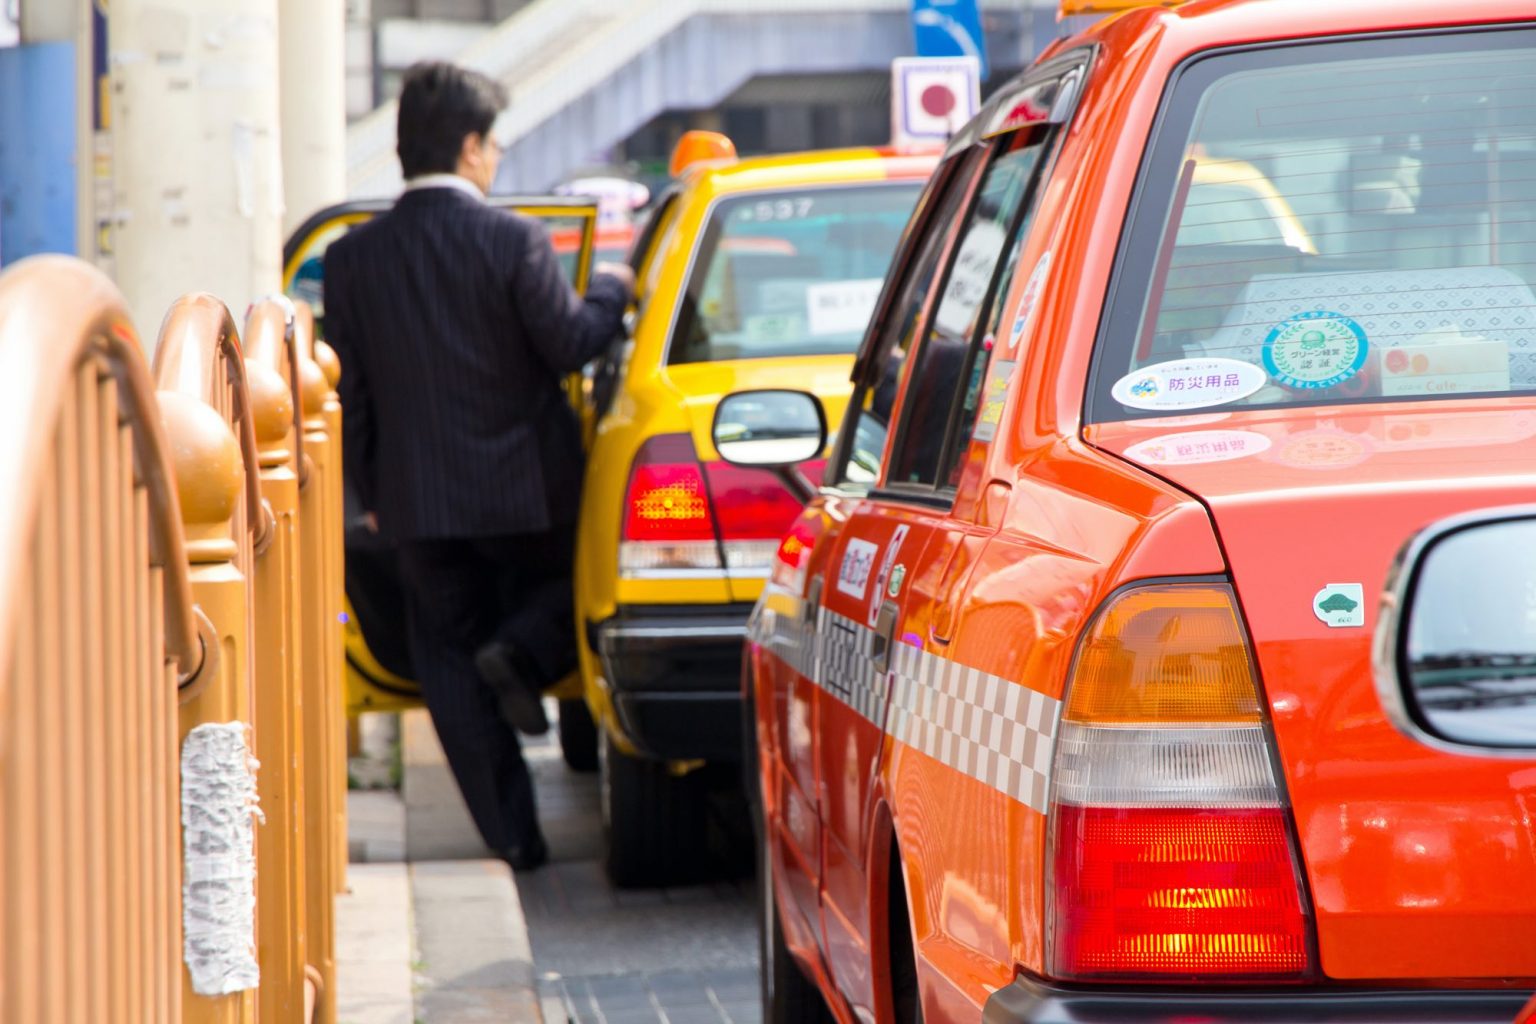 Japanese Decoded: How To Use Taxis - Savvy Tokyo